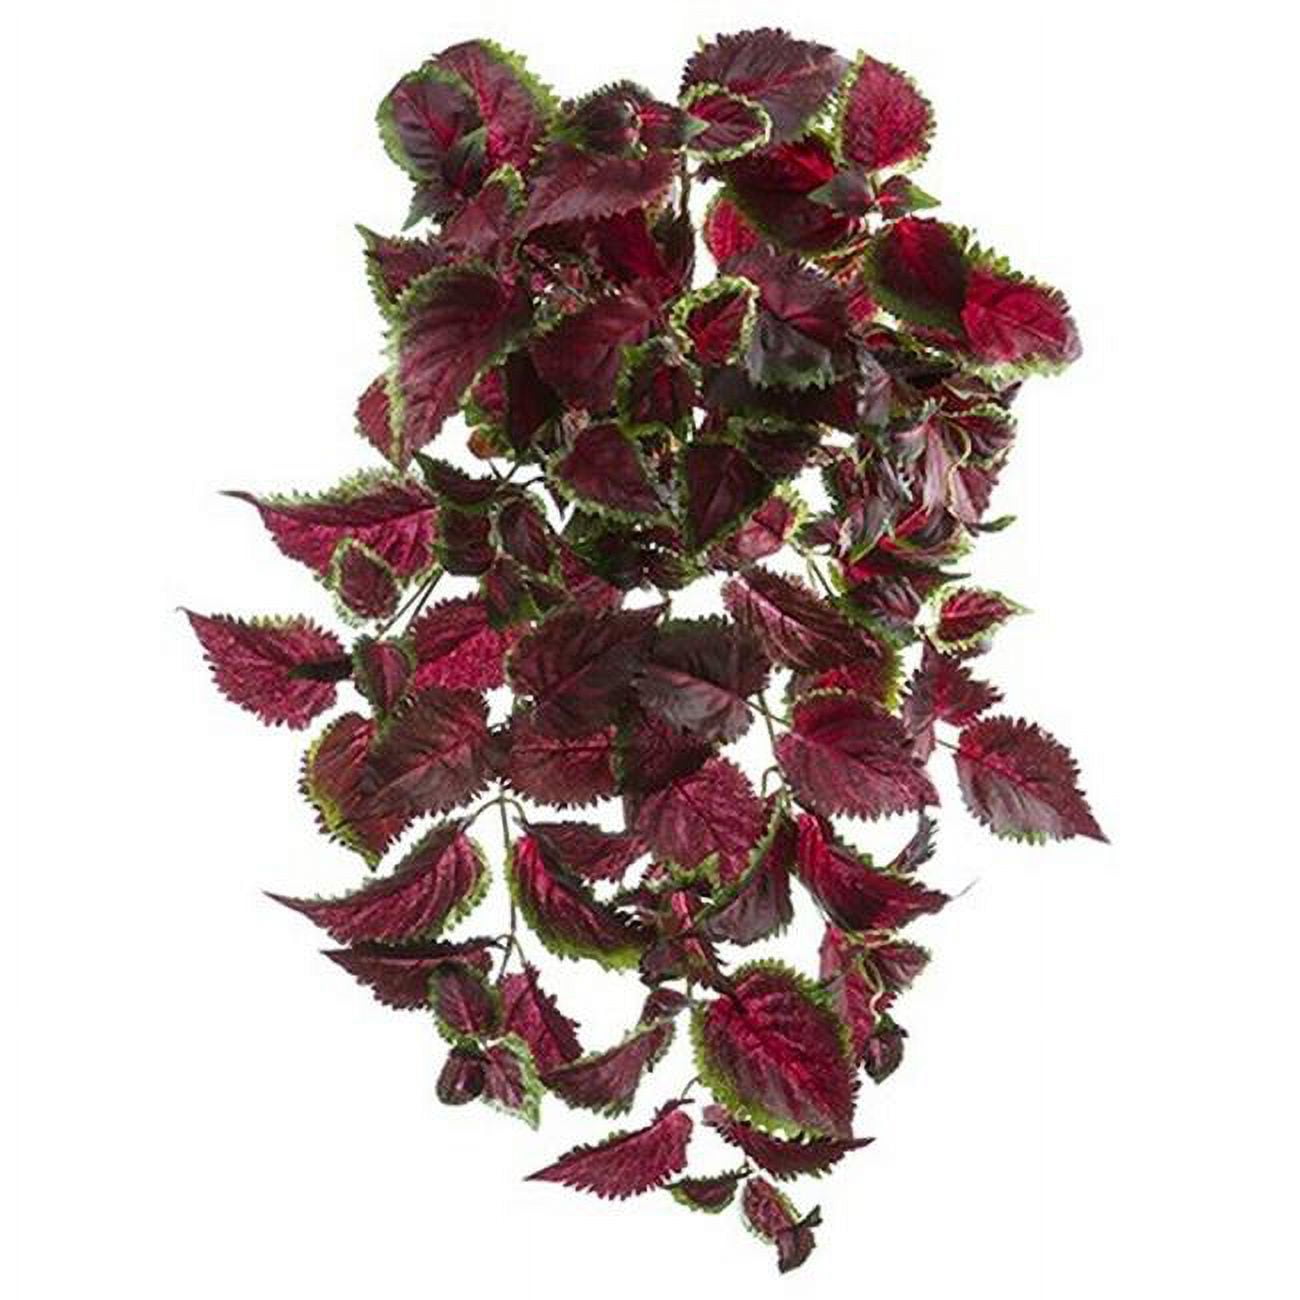 Picture of AllState Floral PBC533-BU-GR 25 in. UV Protected Coleus Bush - Burgundy Green - Pack of 6